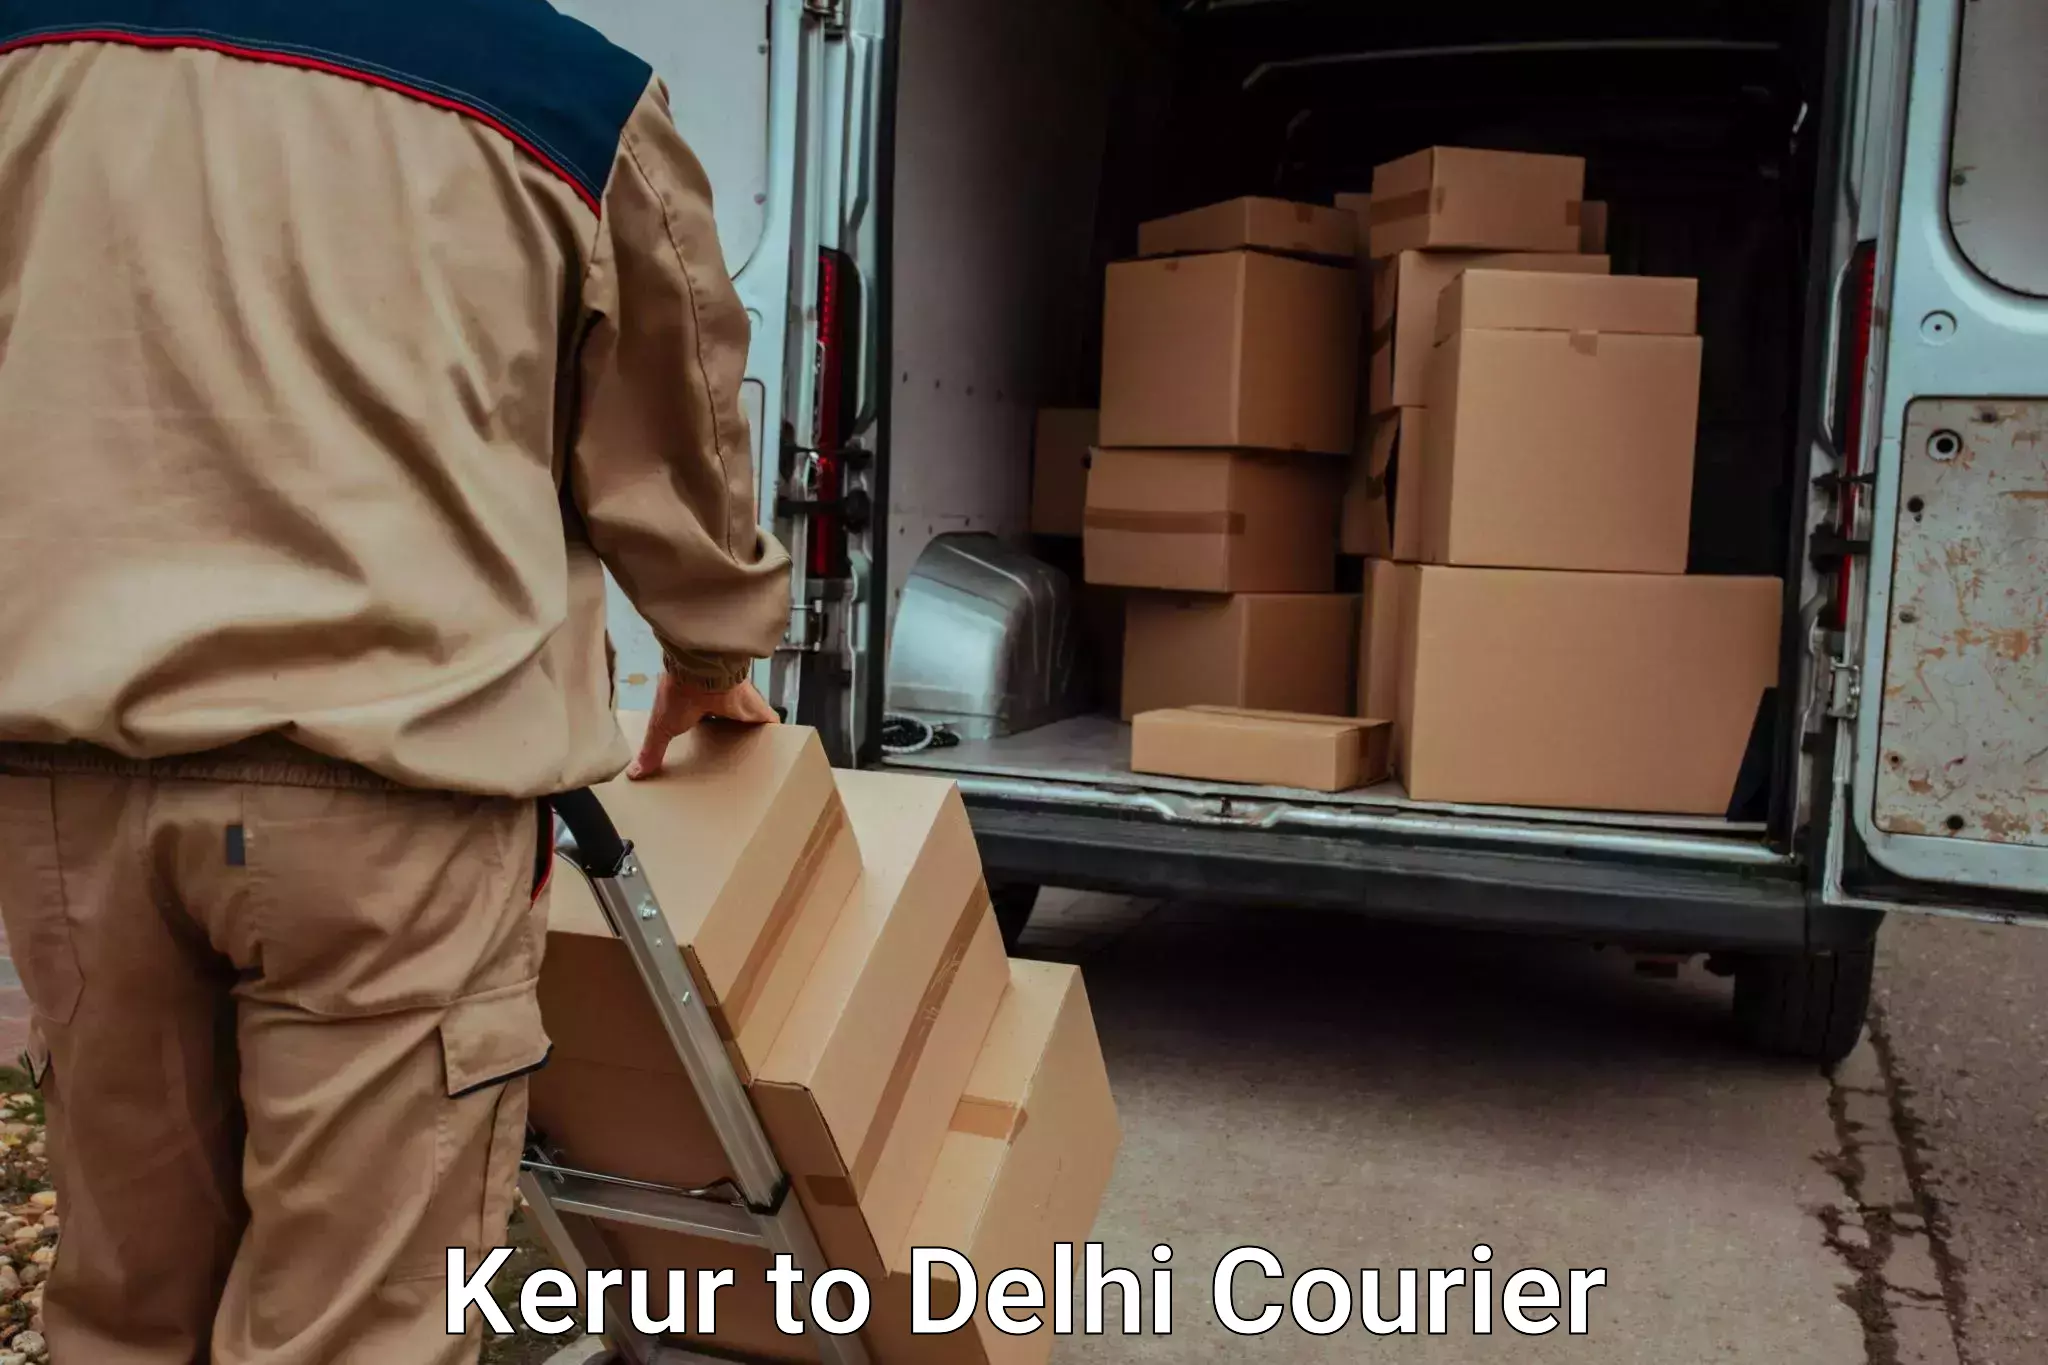 Hassle-free luggage shipping in Kerur to University of Delhi